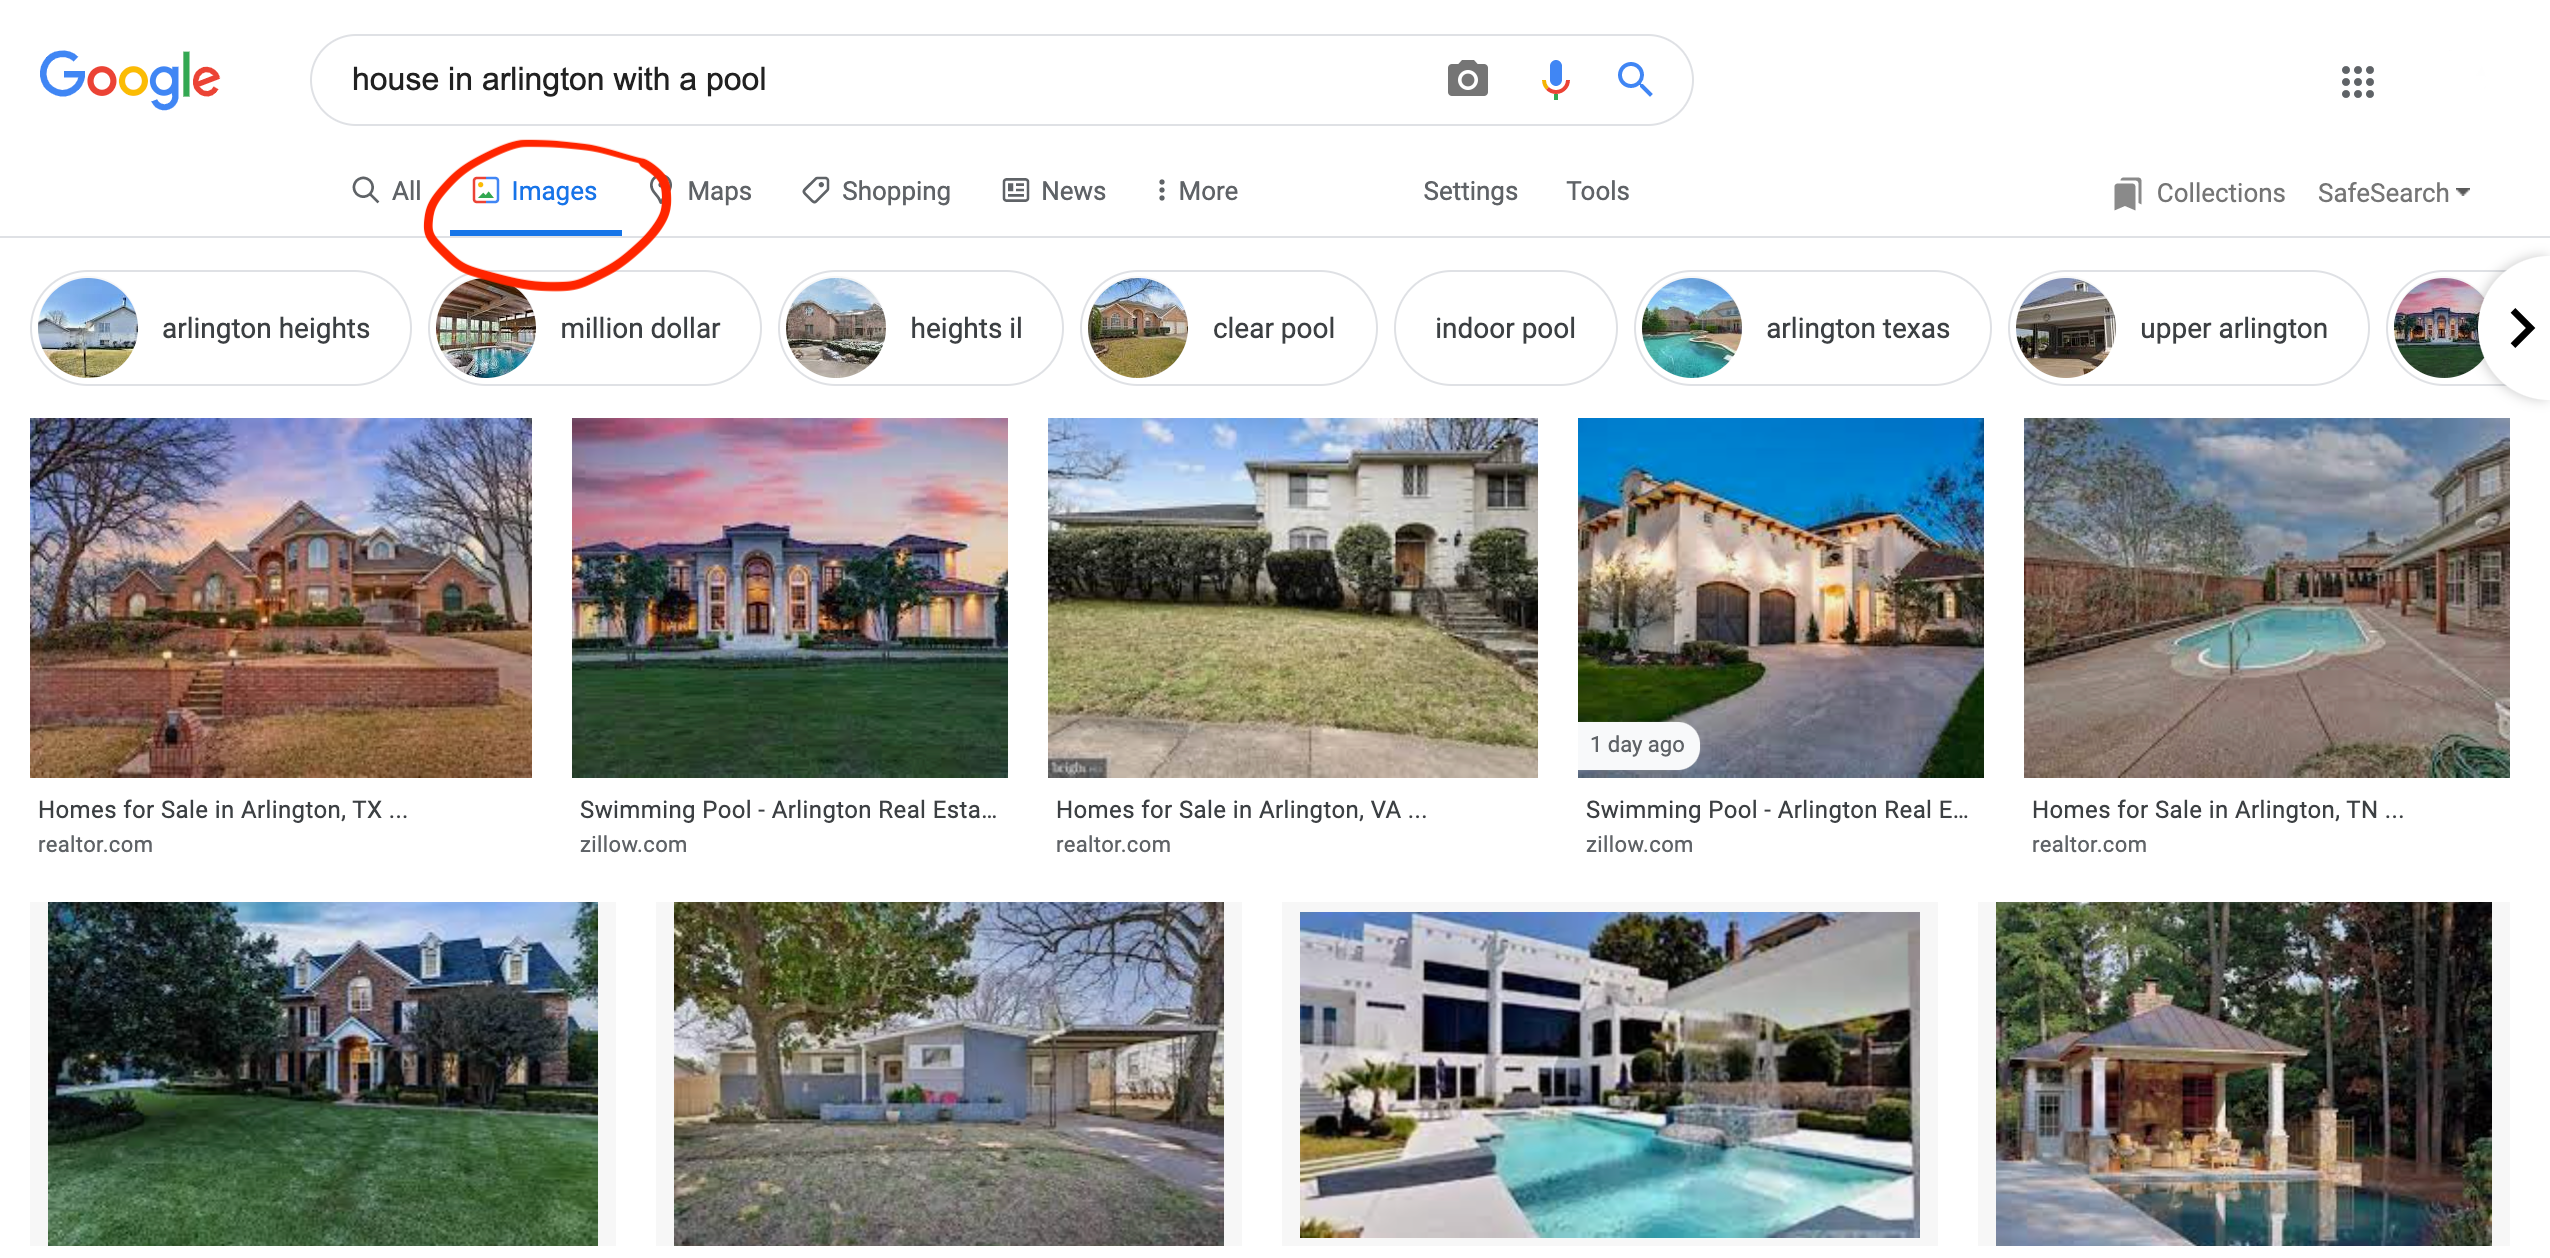 image search in real estate